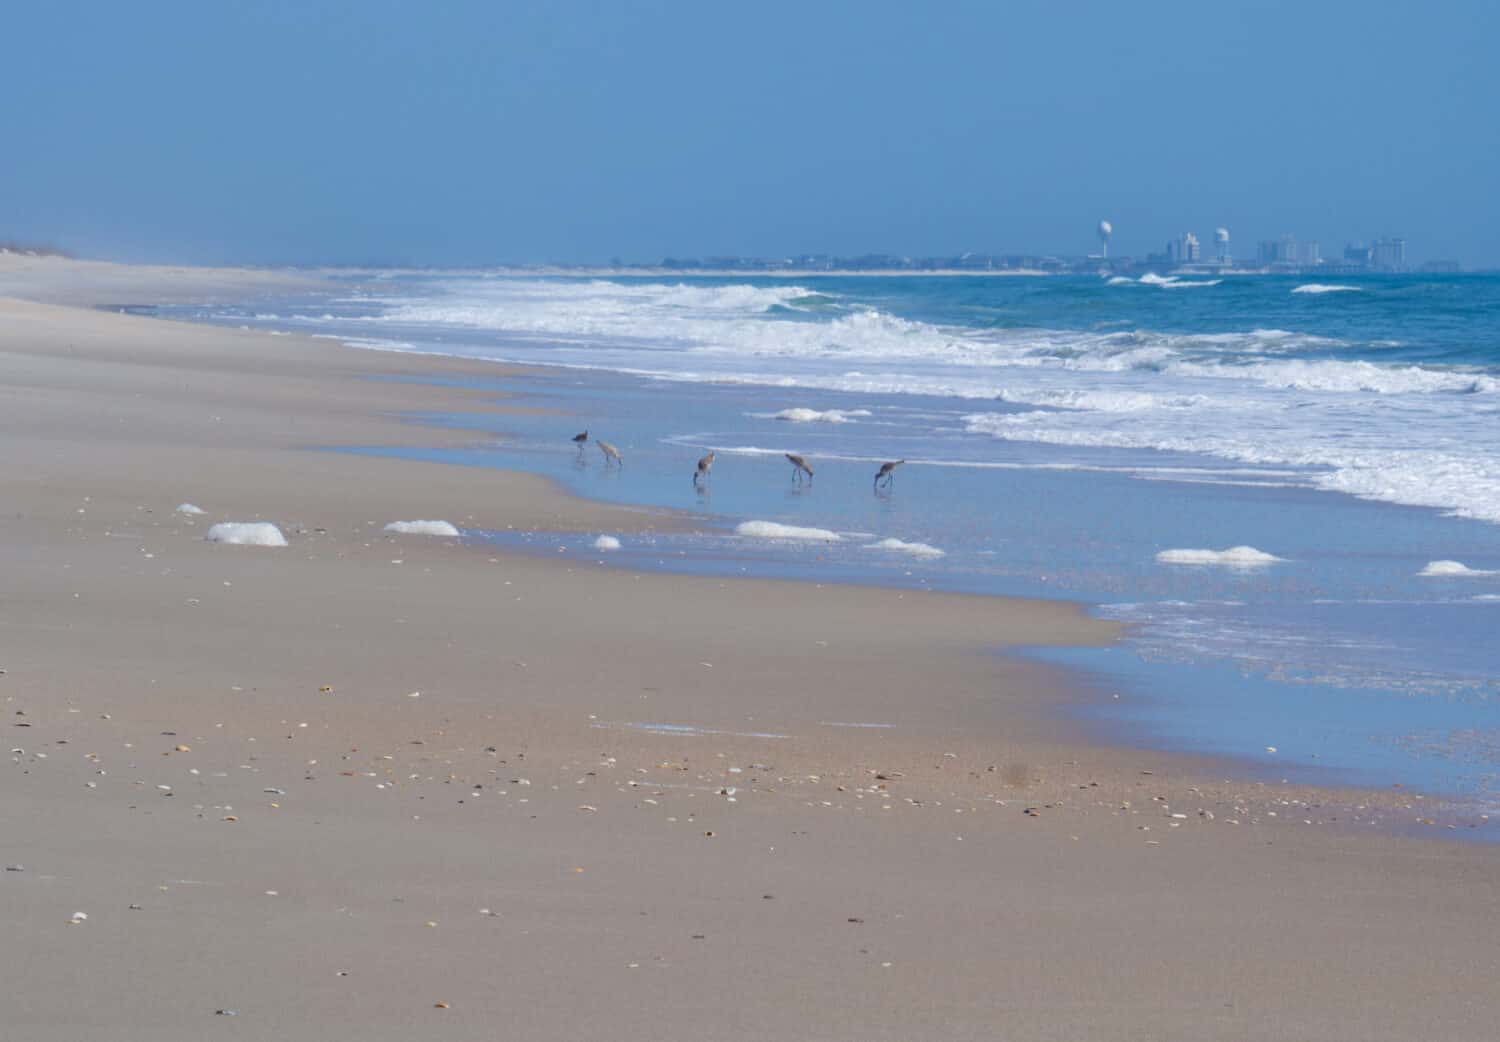 Accessible only by boat, the Beach of Masonboro Island State Natural Area and Nature Preserve is seven miles of pristine, untouched beach